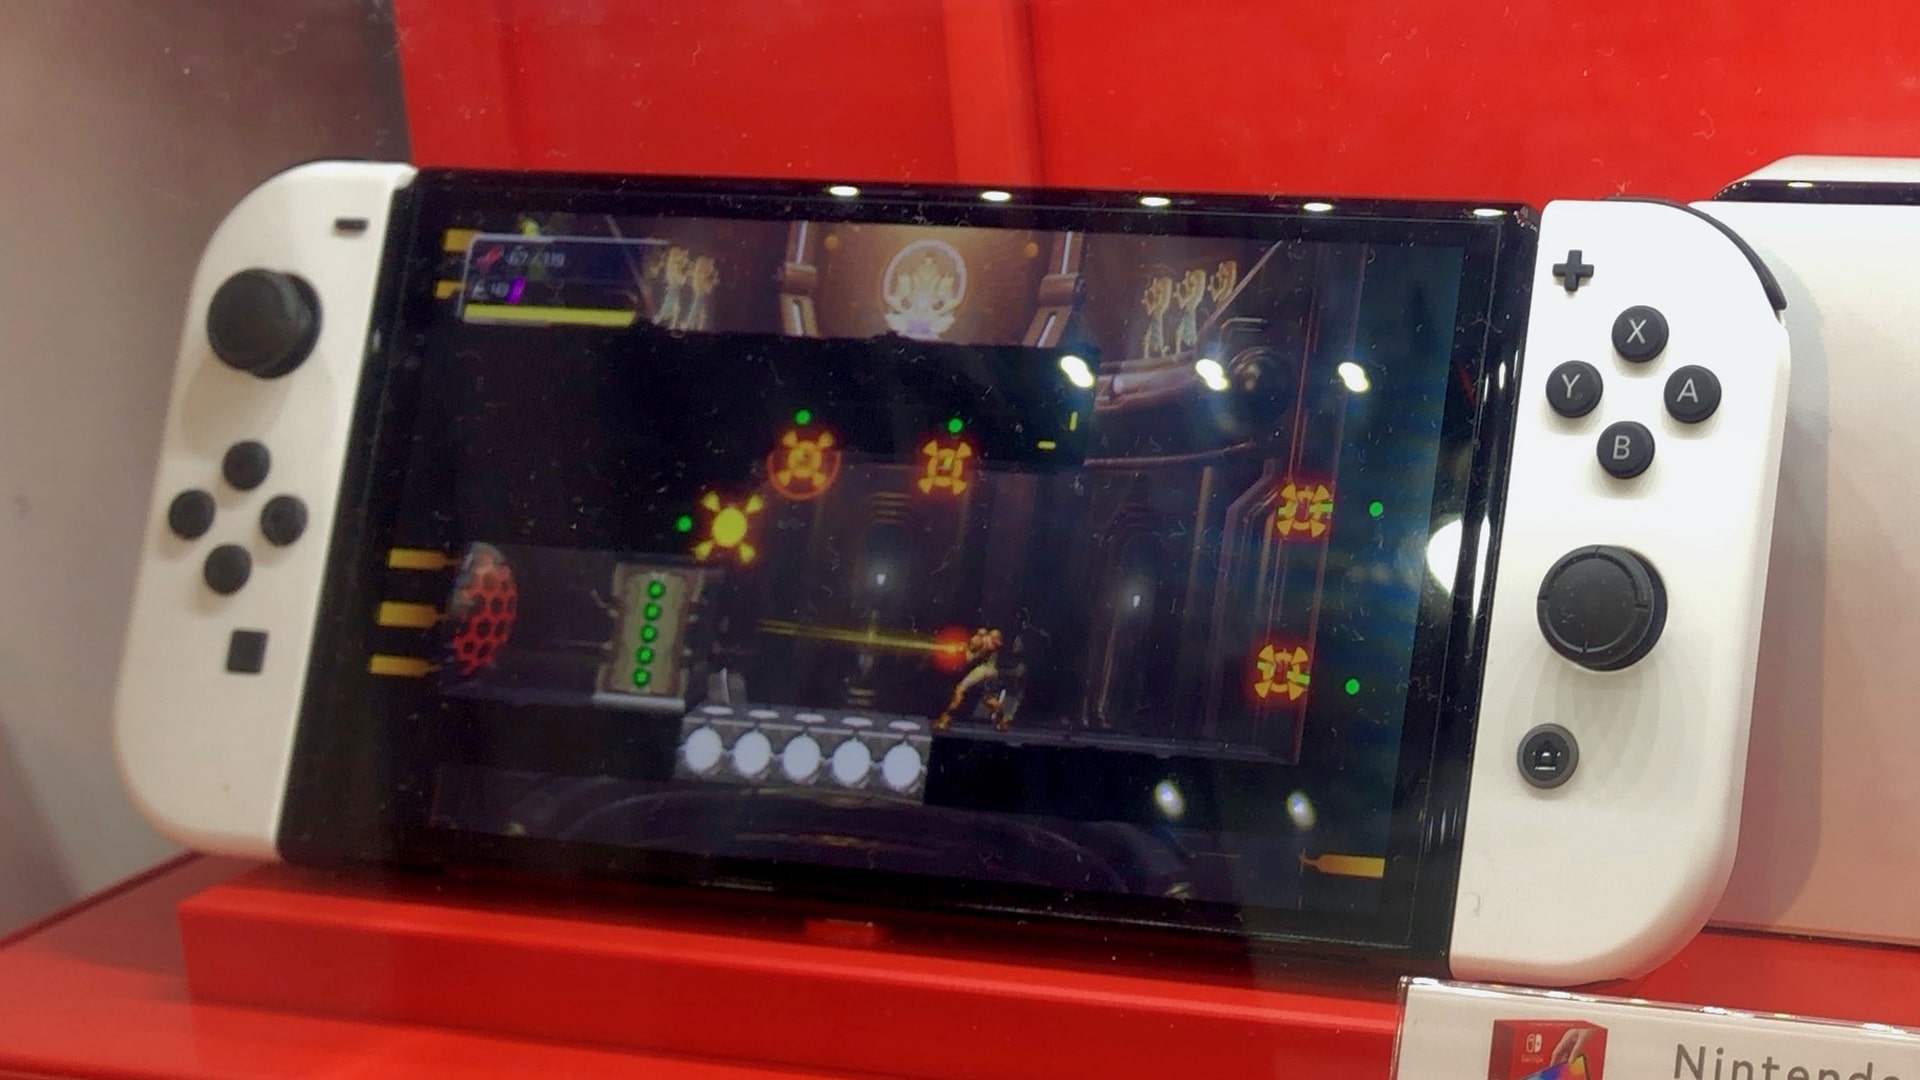 Close-up view of the Nintendo Switch OLED Model